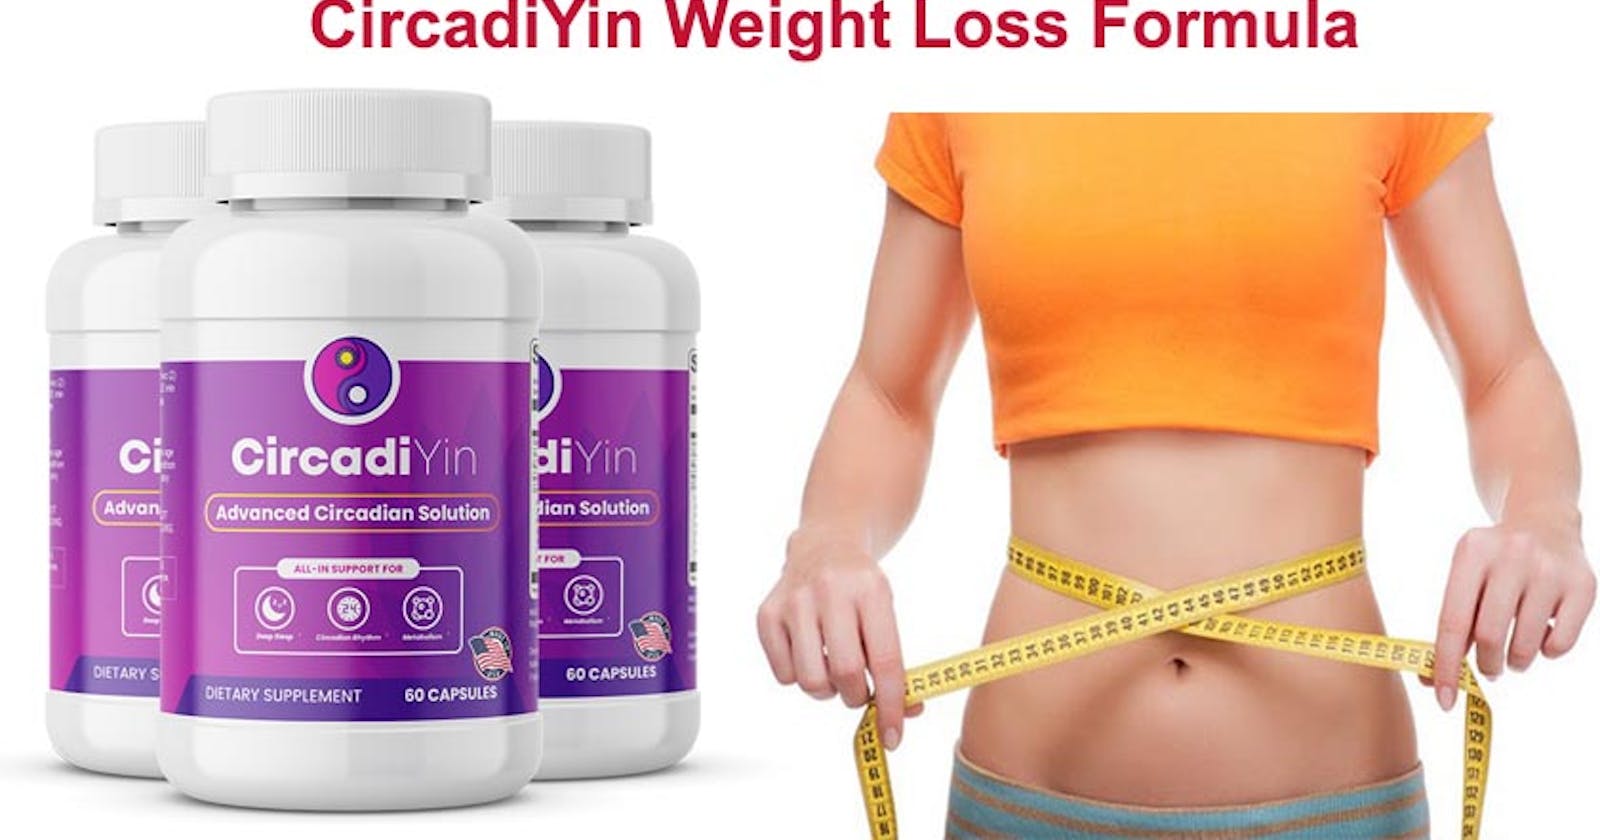 CircadiYin Weight Loss Supplement 100% Safe, Does It Really Work Or Not?